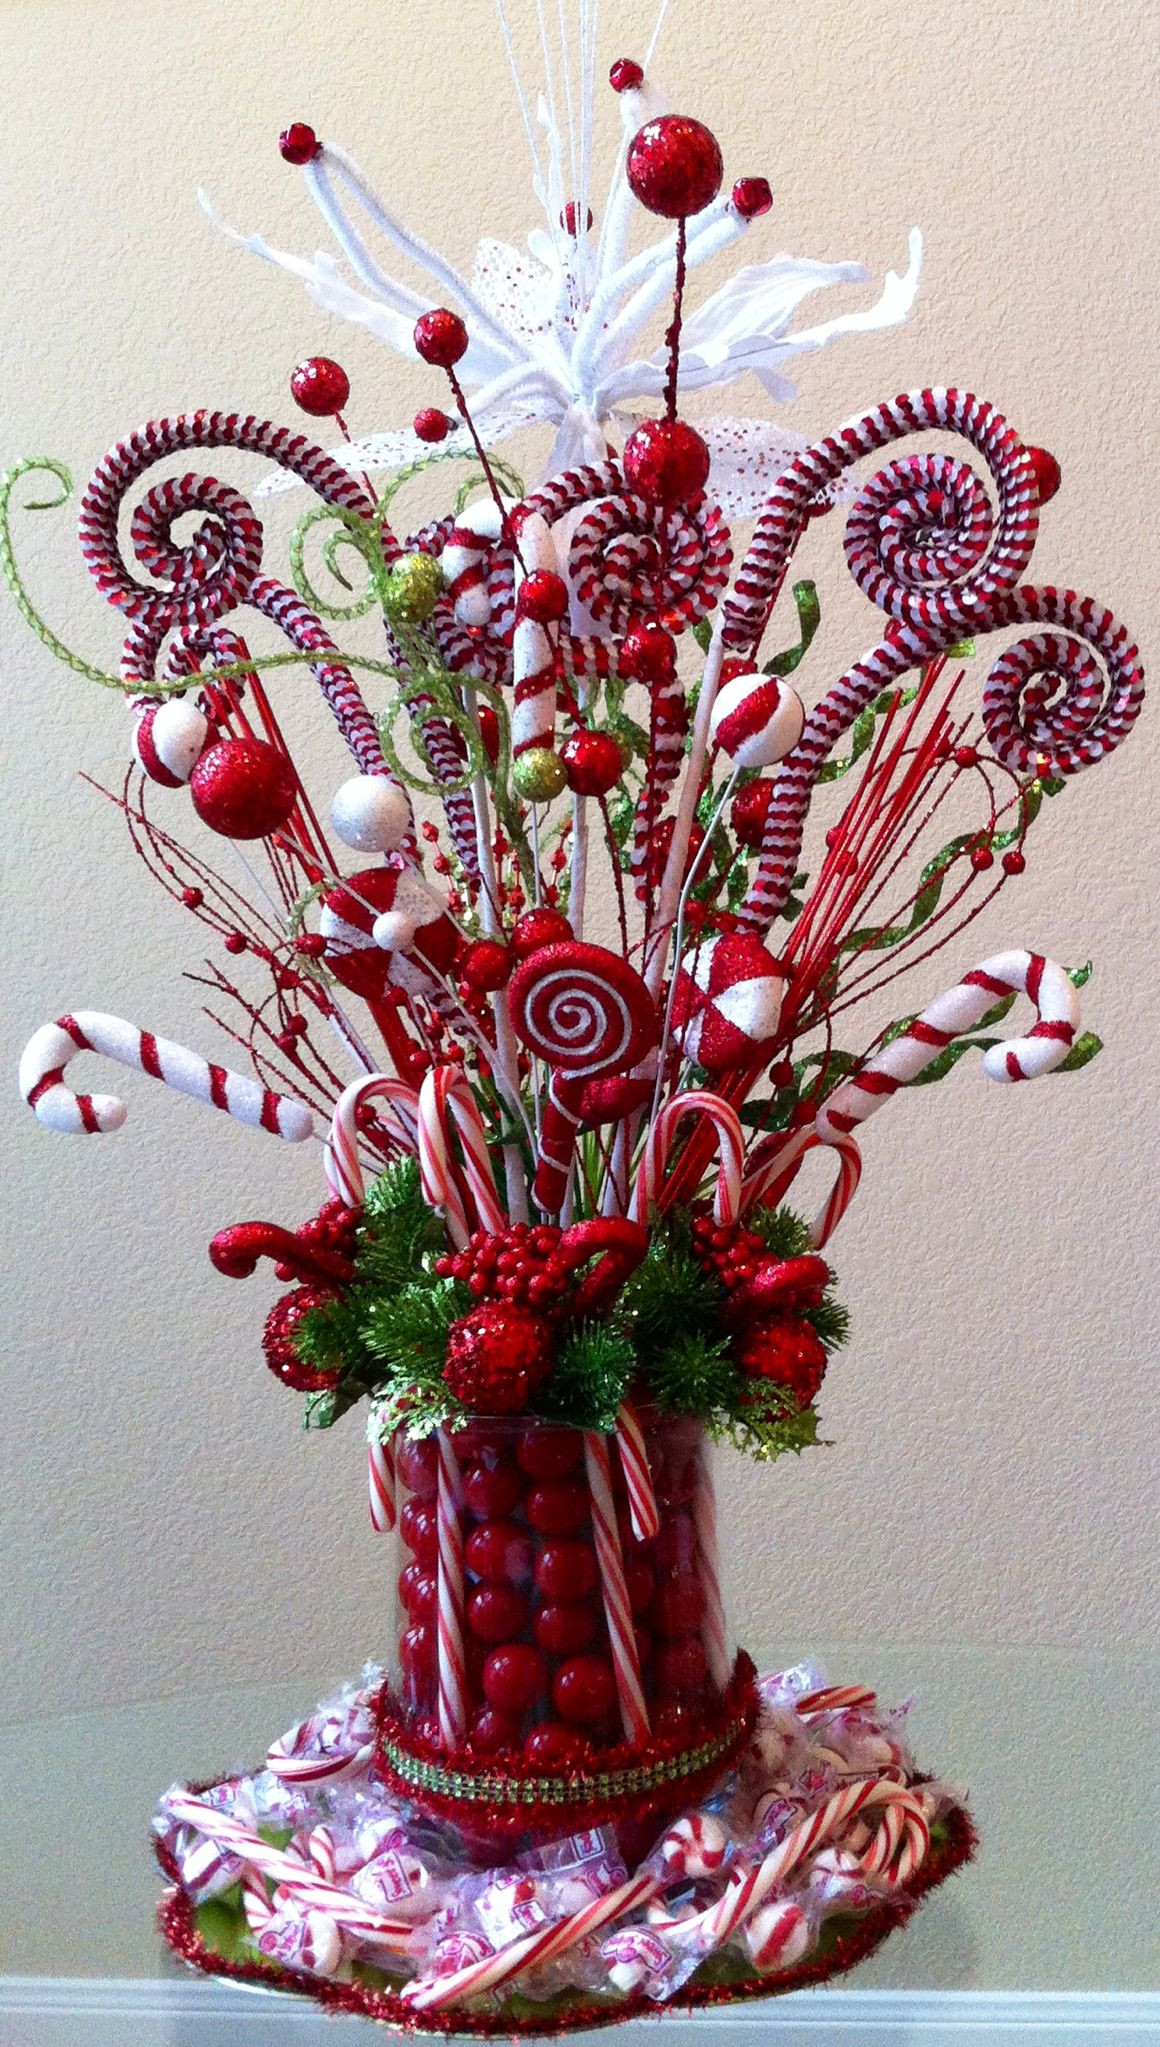 Candy Cane Centerpieces For Christmas
 Candy Cane Candy Bouquet Gift Centerpiece for Parties